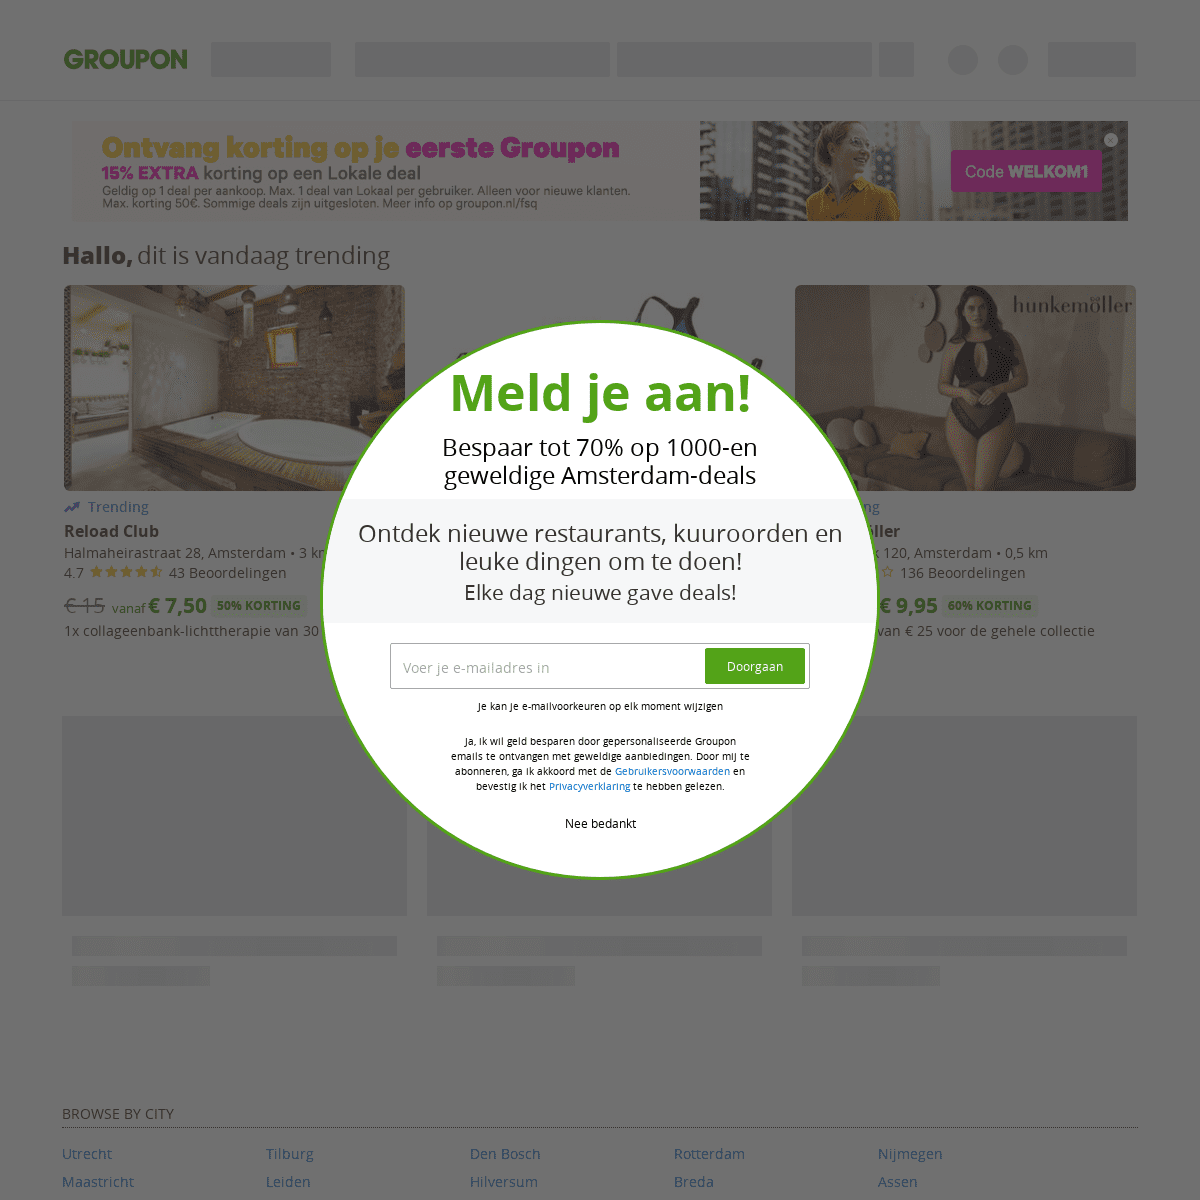 A complete backup of https://groupon.nl